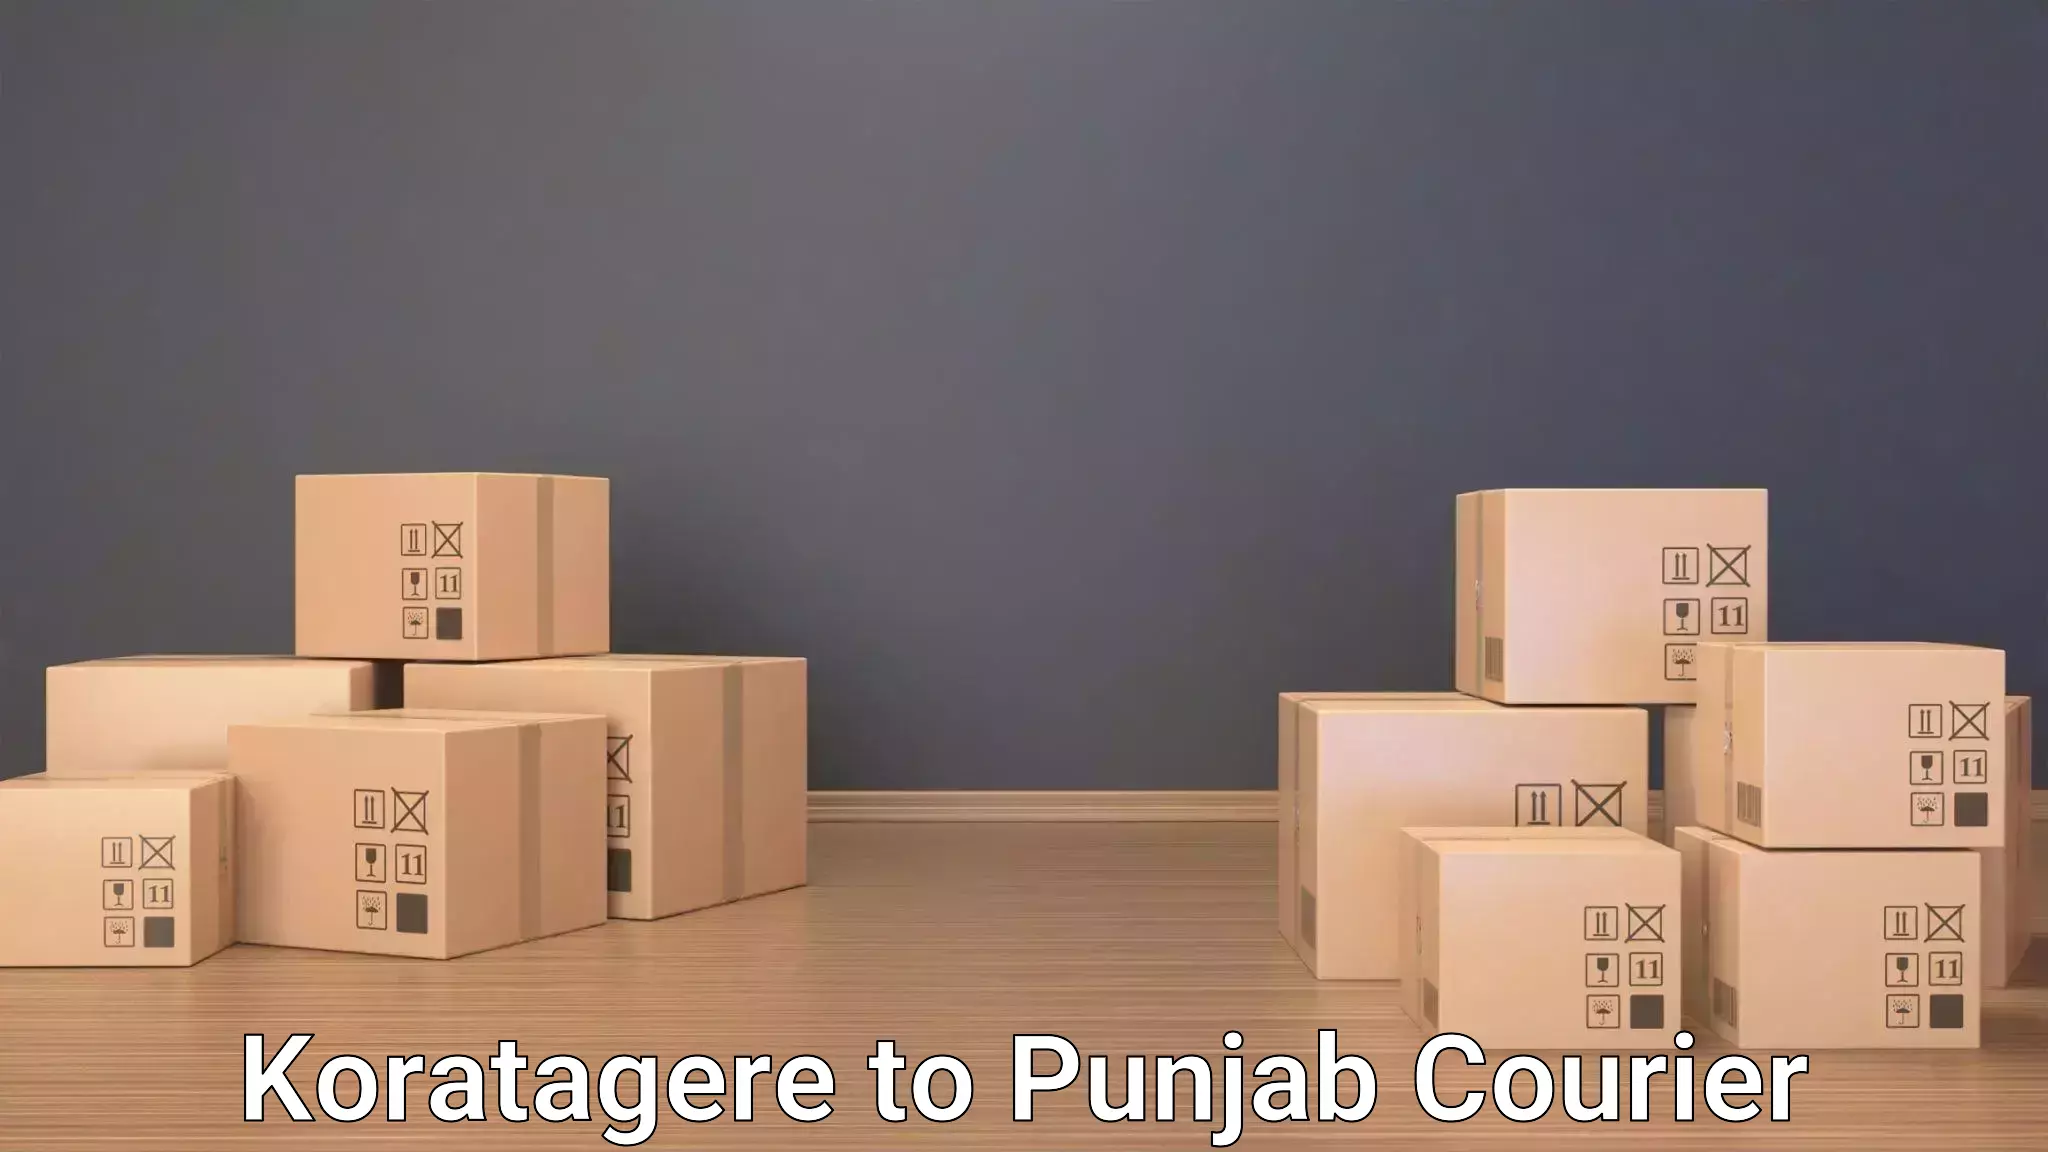 Airport luggage delivery Koratagere to Punjab